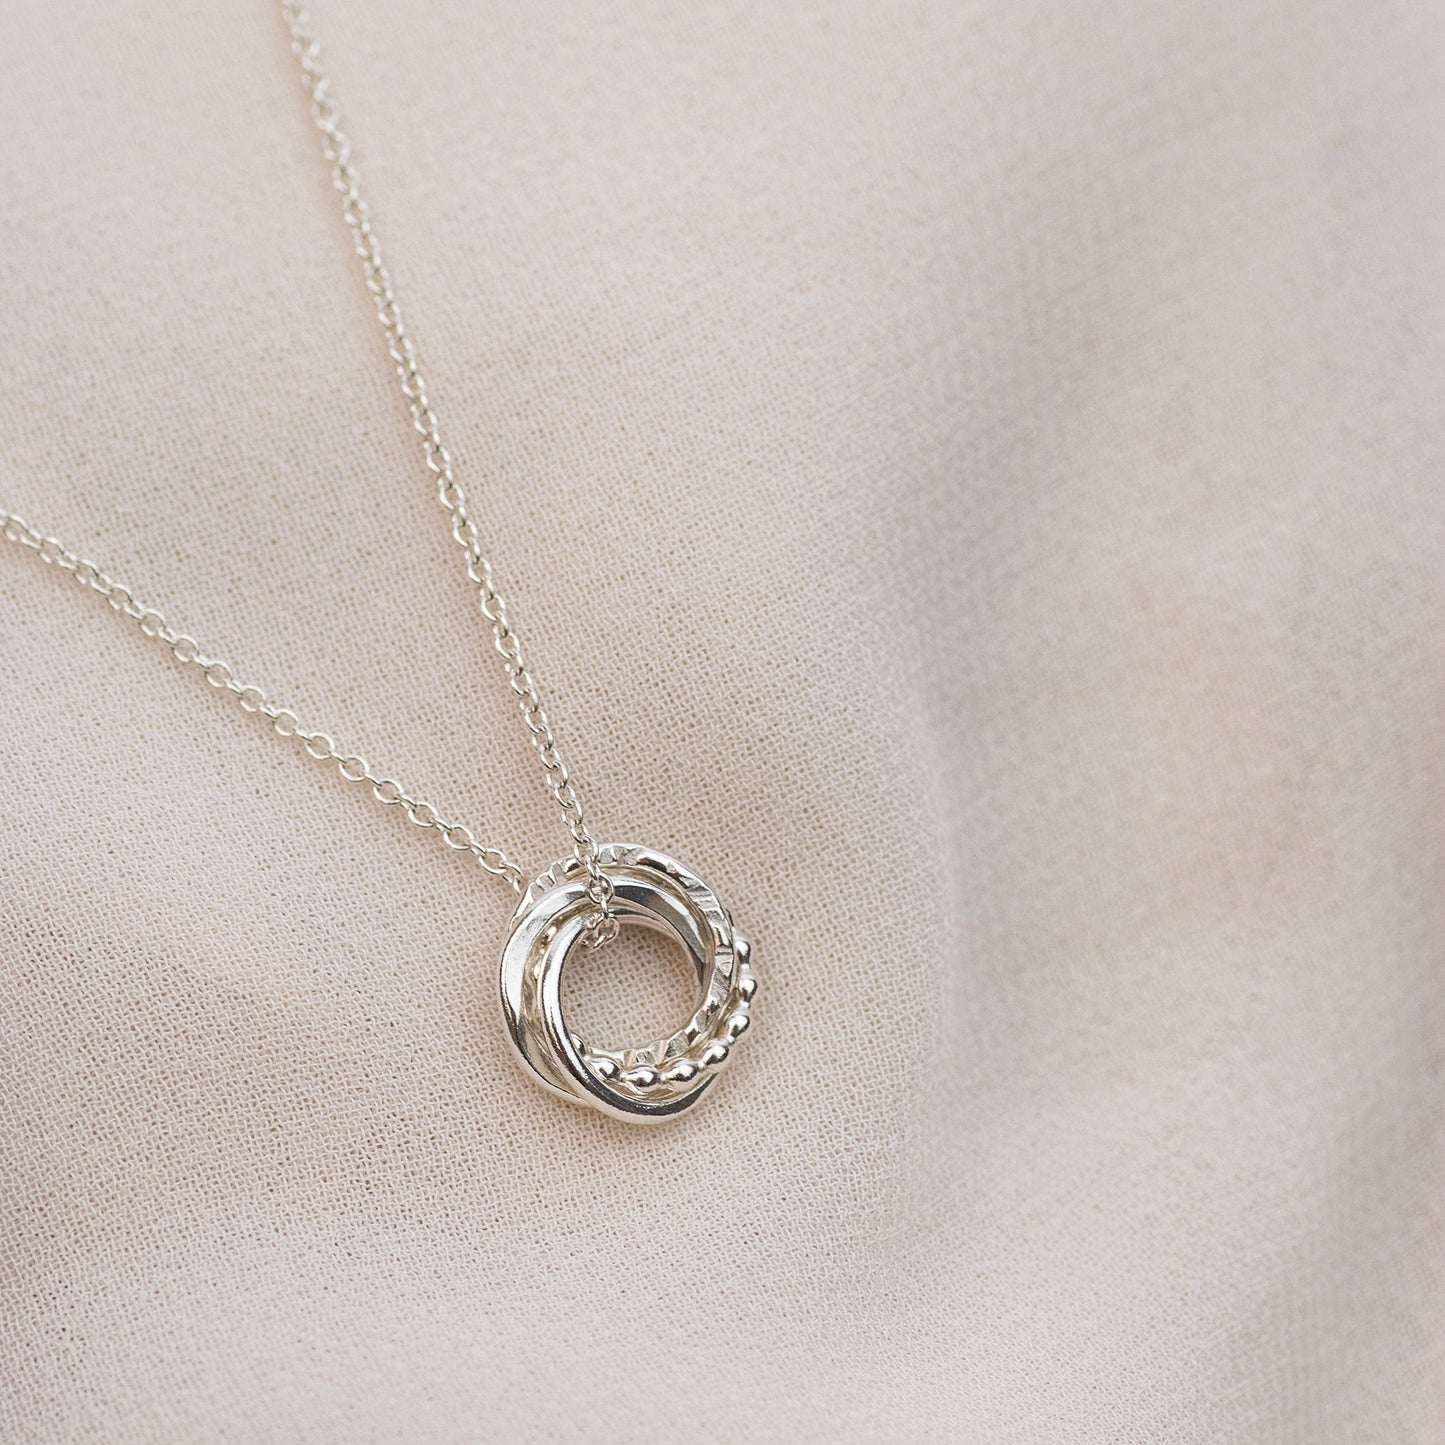 4 Siblings Necklace - Silver Love Knot - Linked for Lifetime